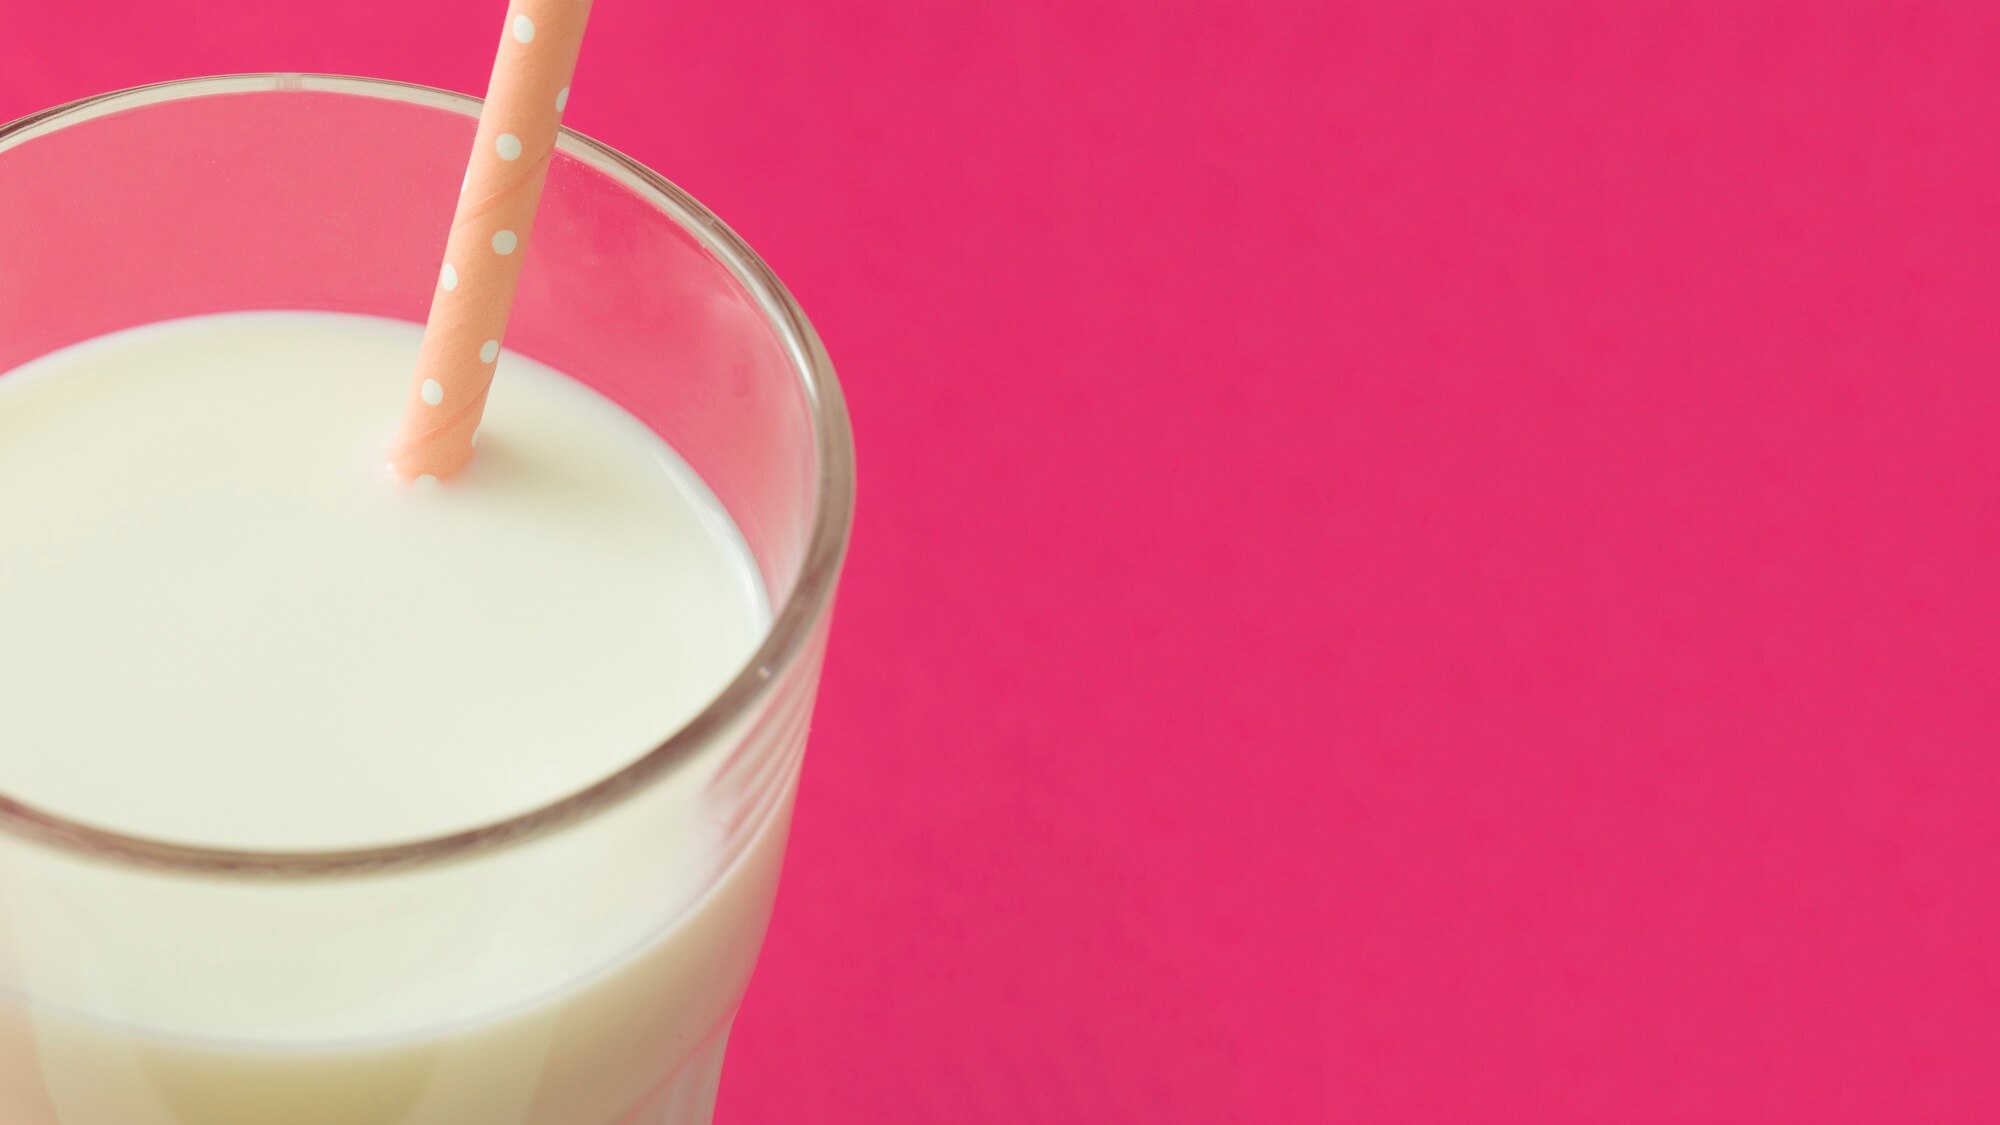 panoramic-view-of-milk-in-the-glass-with-drinking-straw_23-2147872539.jpg